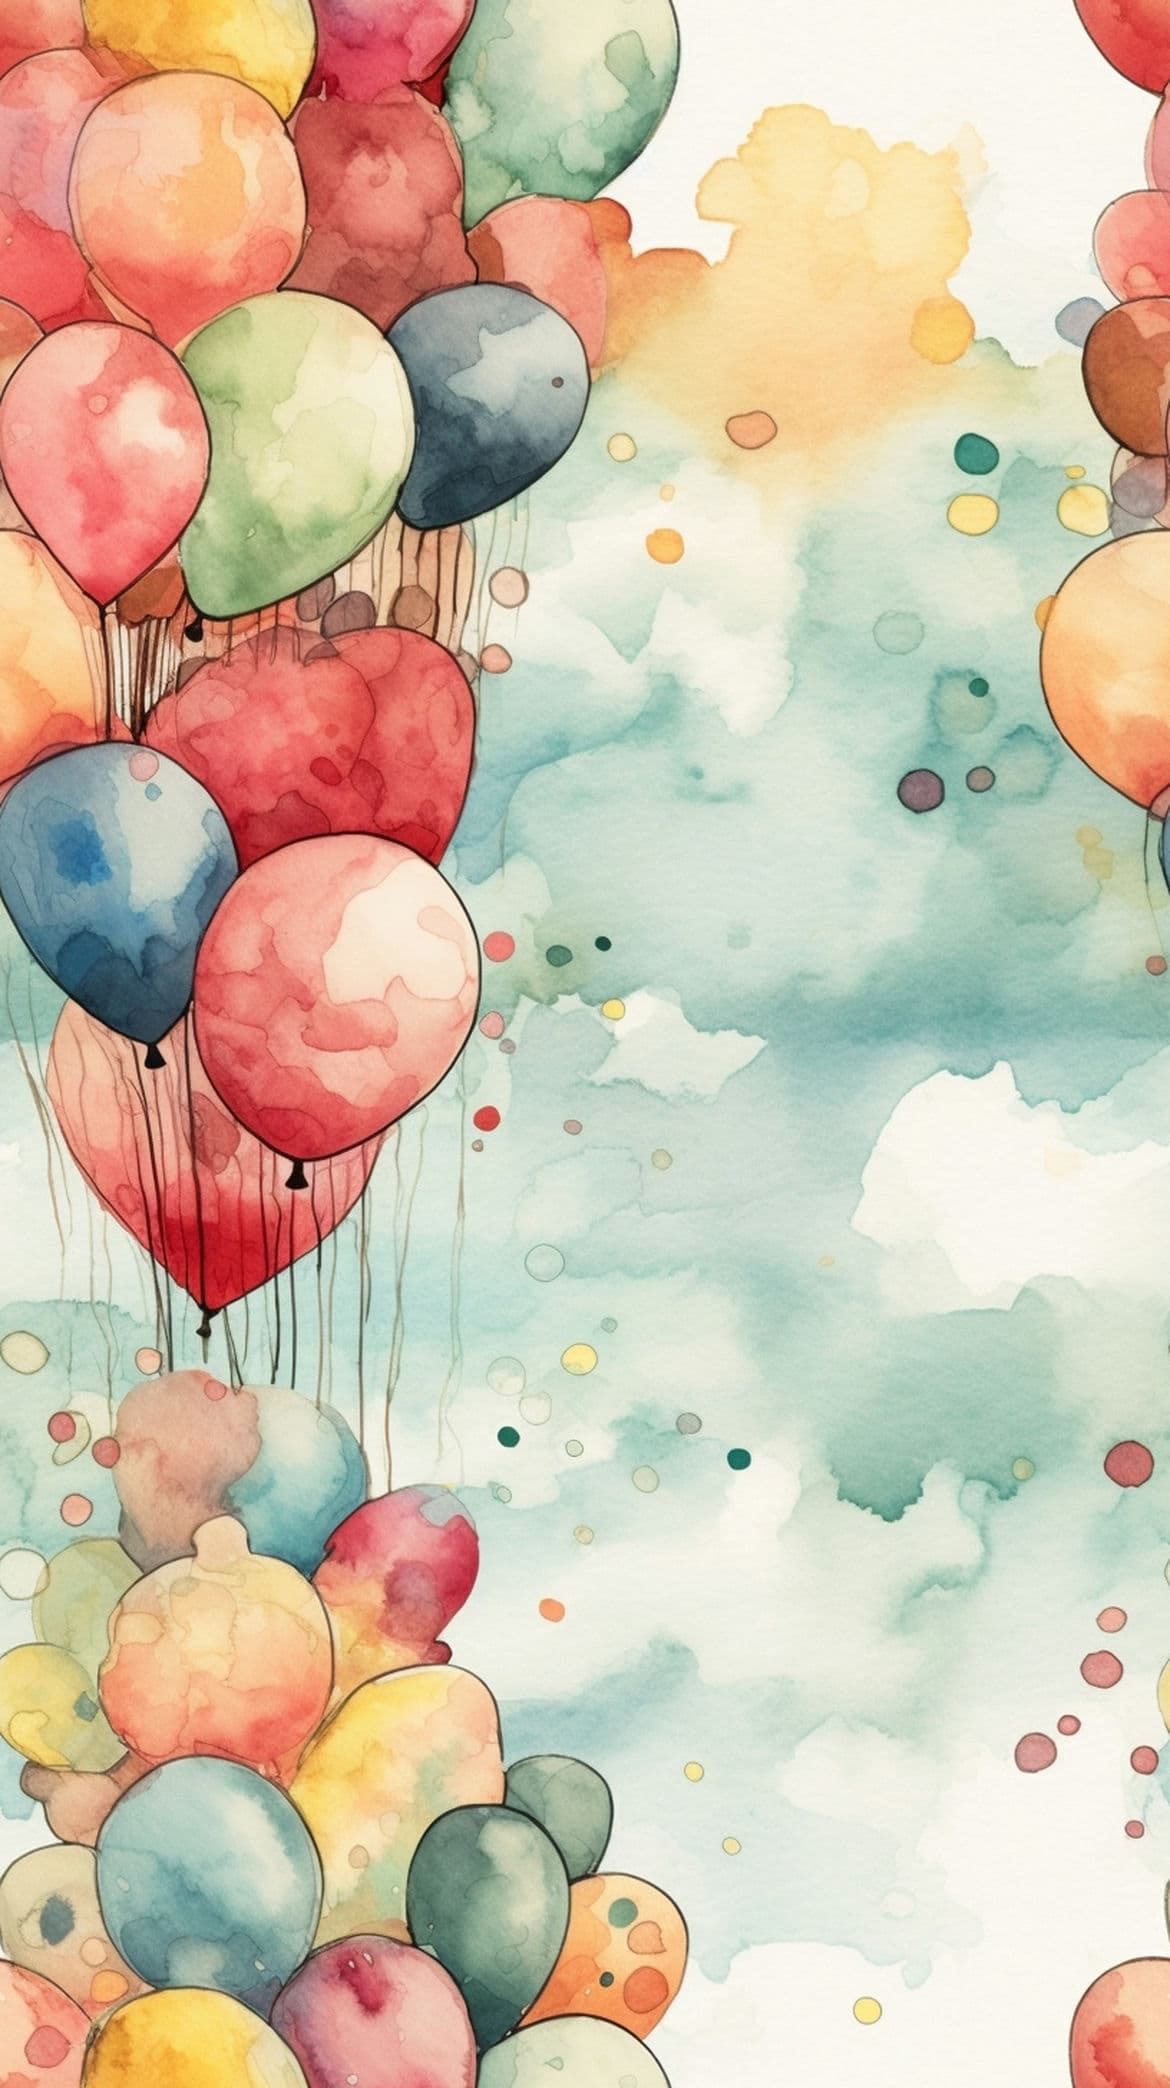 Watercolor painting of colorful balloons floating in the sky - Balloons